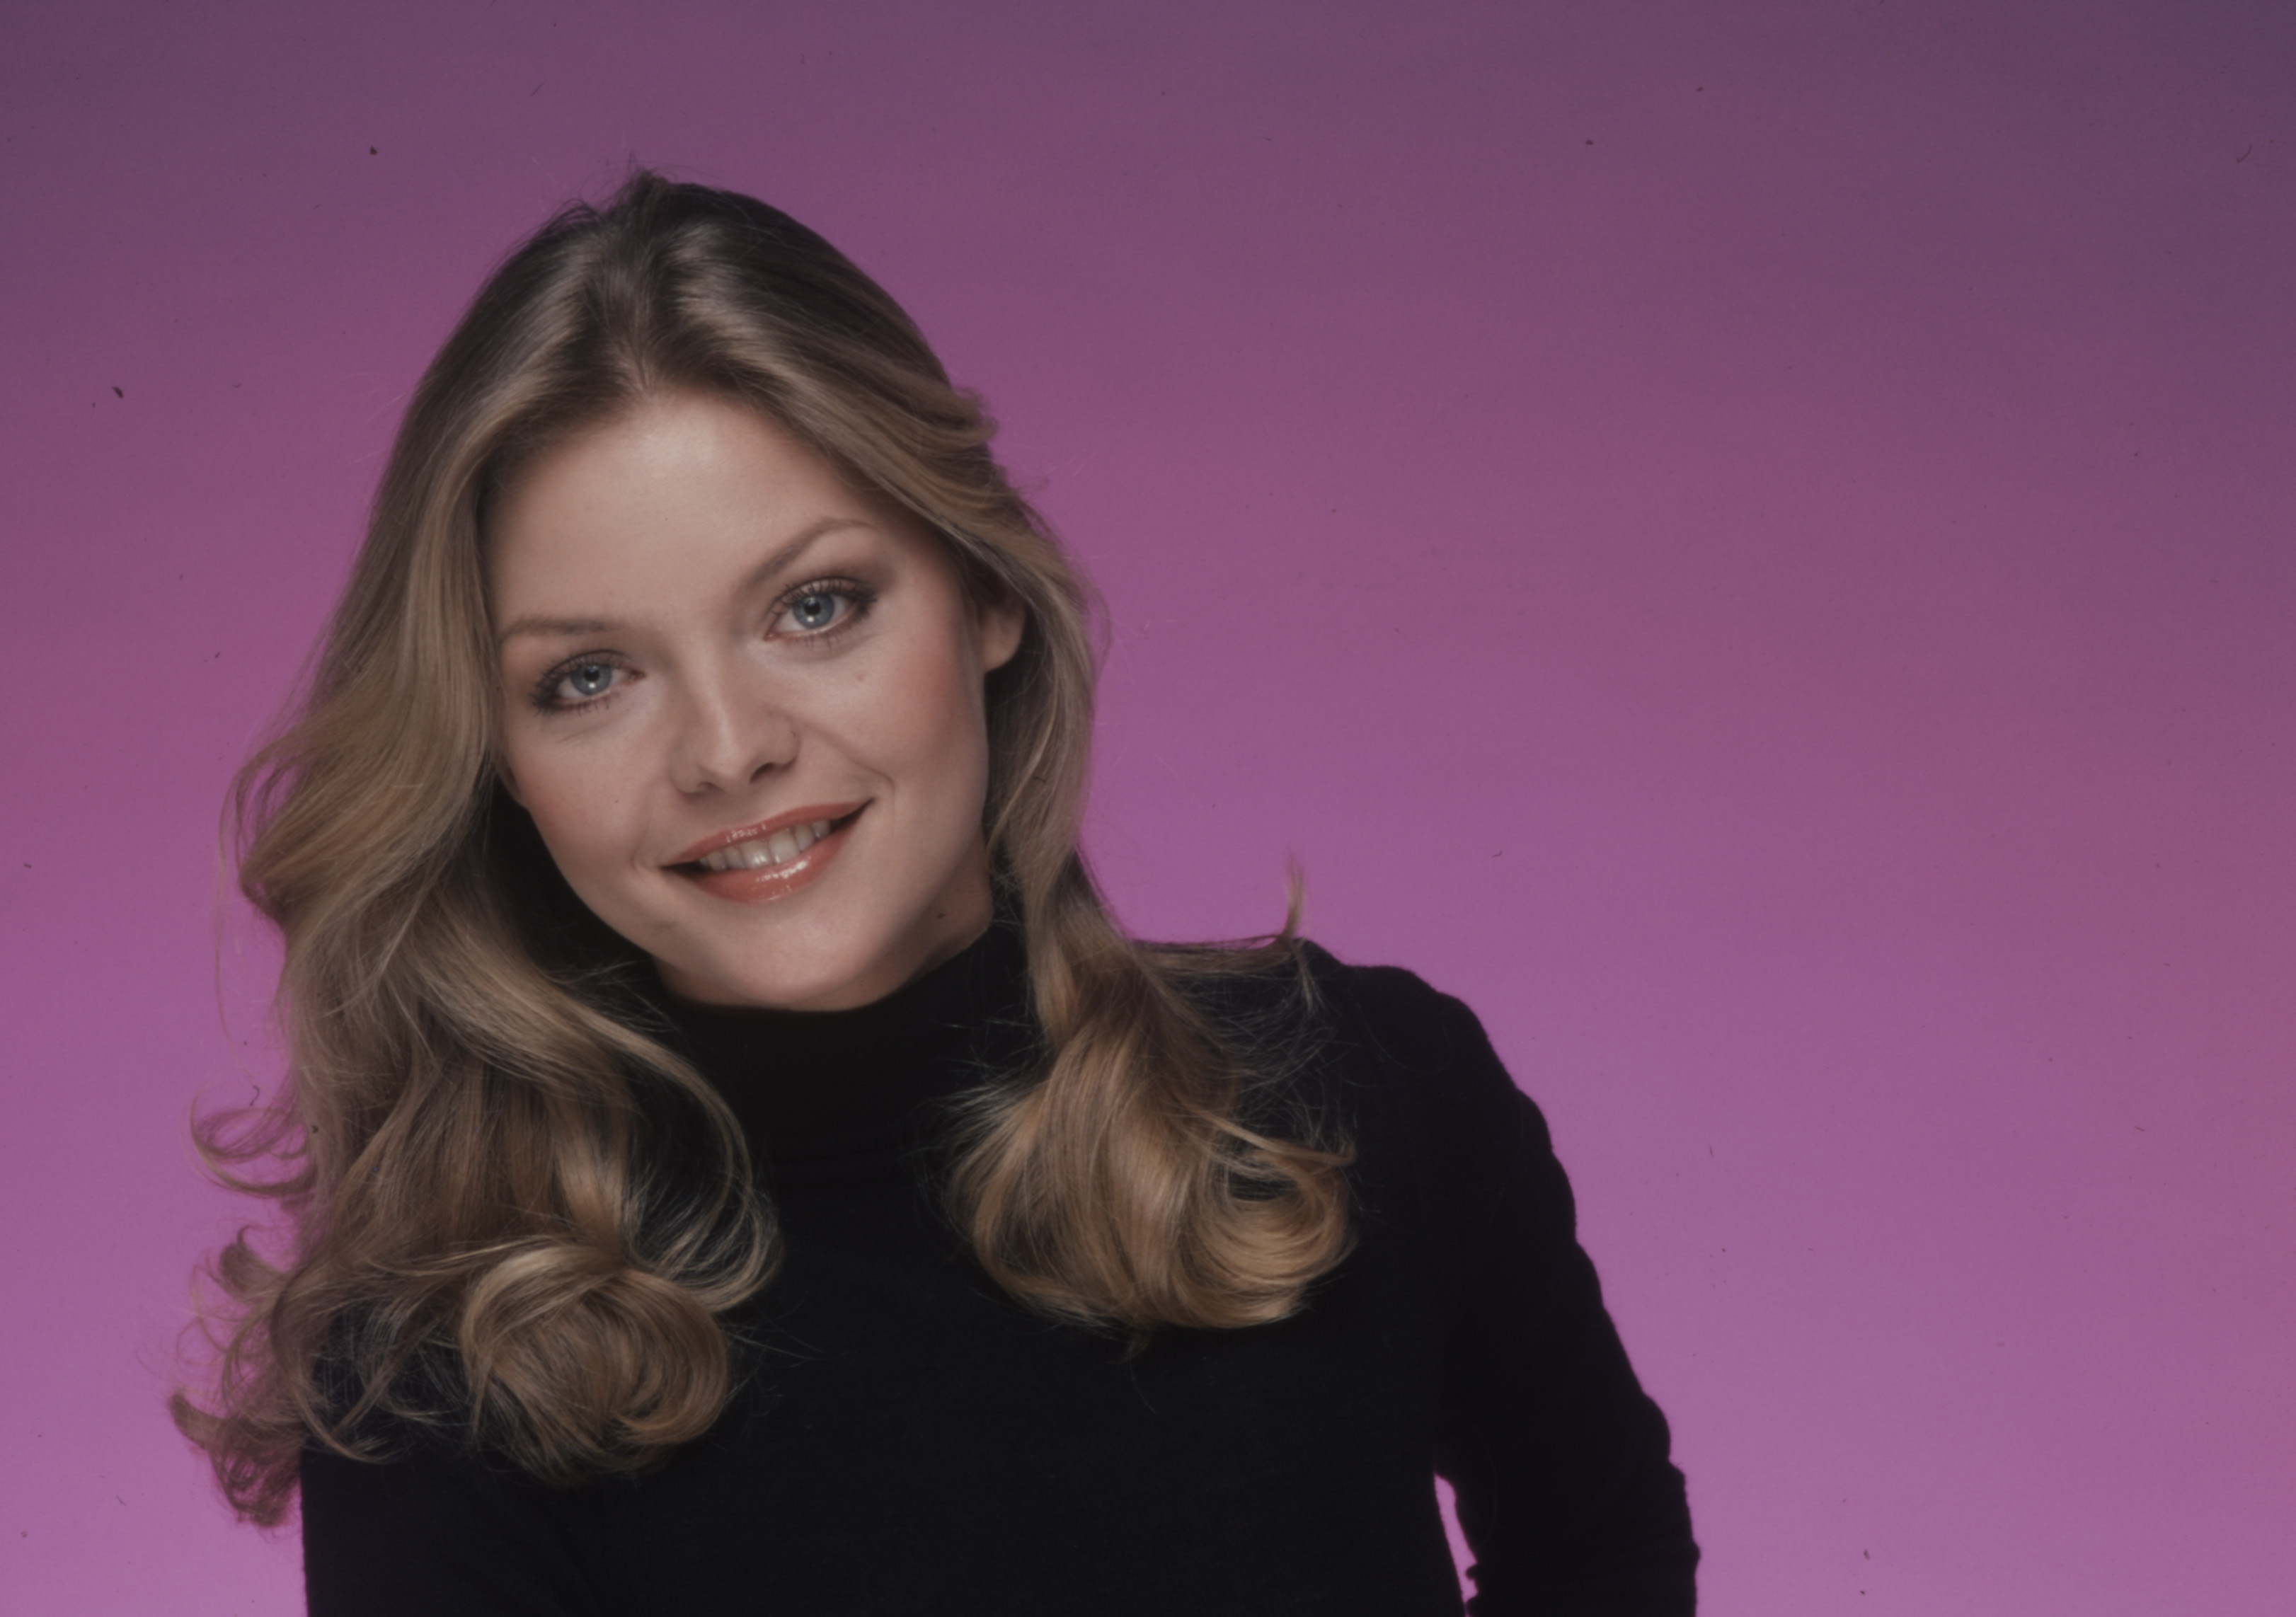 Michelle Pfeiffer poses for a promotional photo for the ABC show "Delta House" on January 2, 1979 in Los Angeles, California. | Source: Getty Images